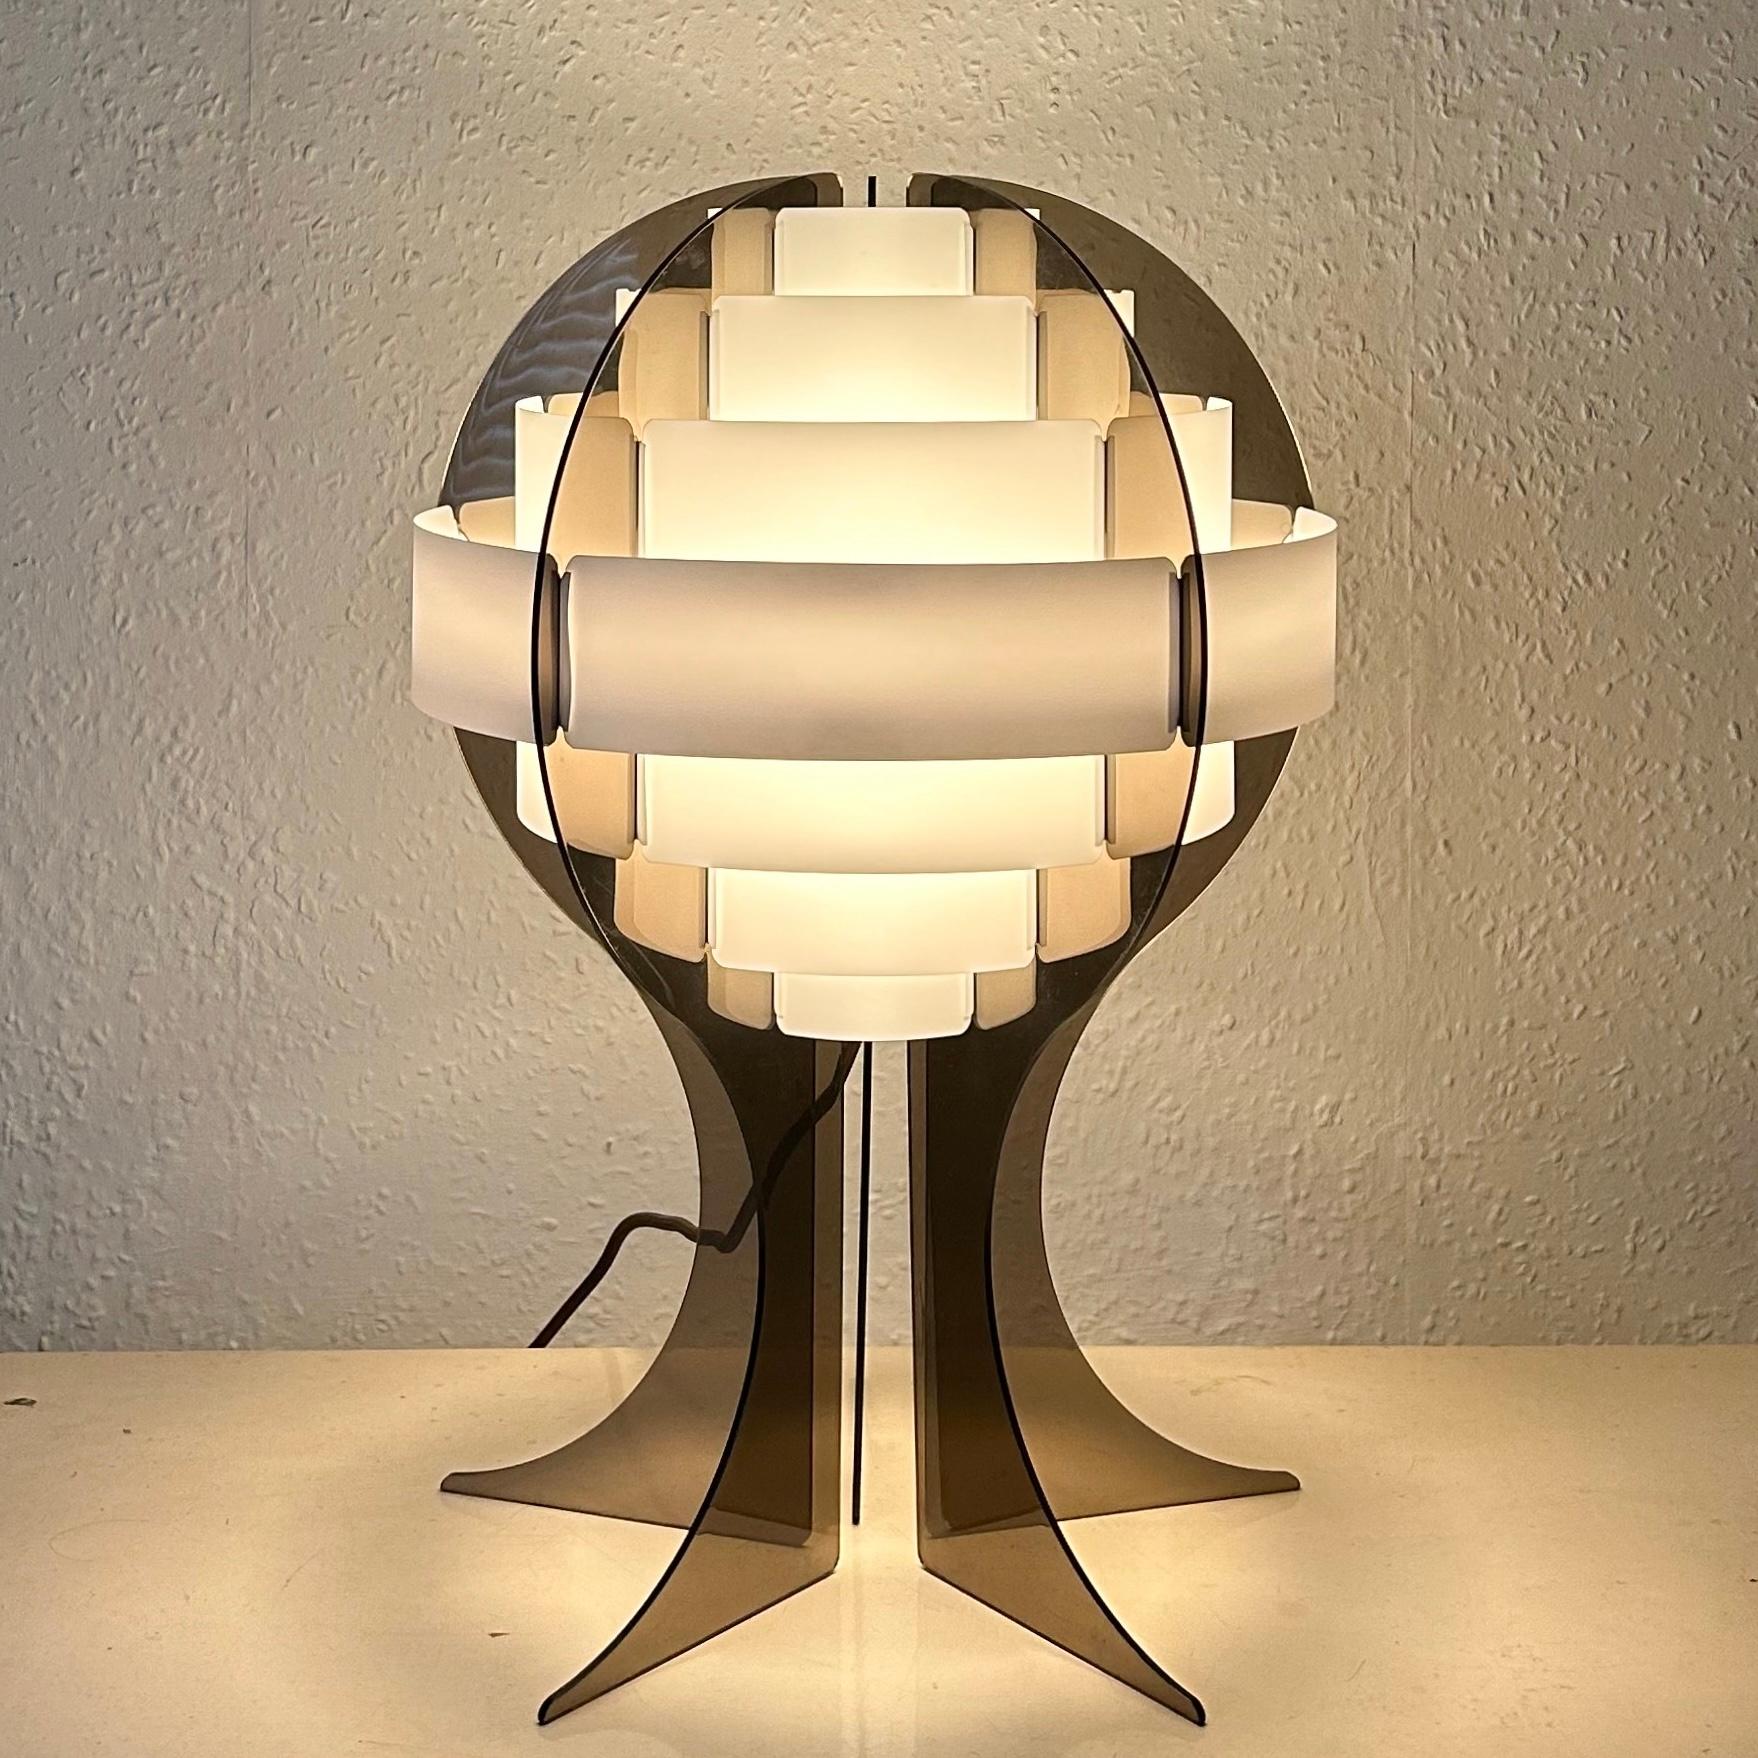 Space Age Table Lamp by Flemming Brylle & Preben Jacobsen for Quality System - Danish, c1960/70s